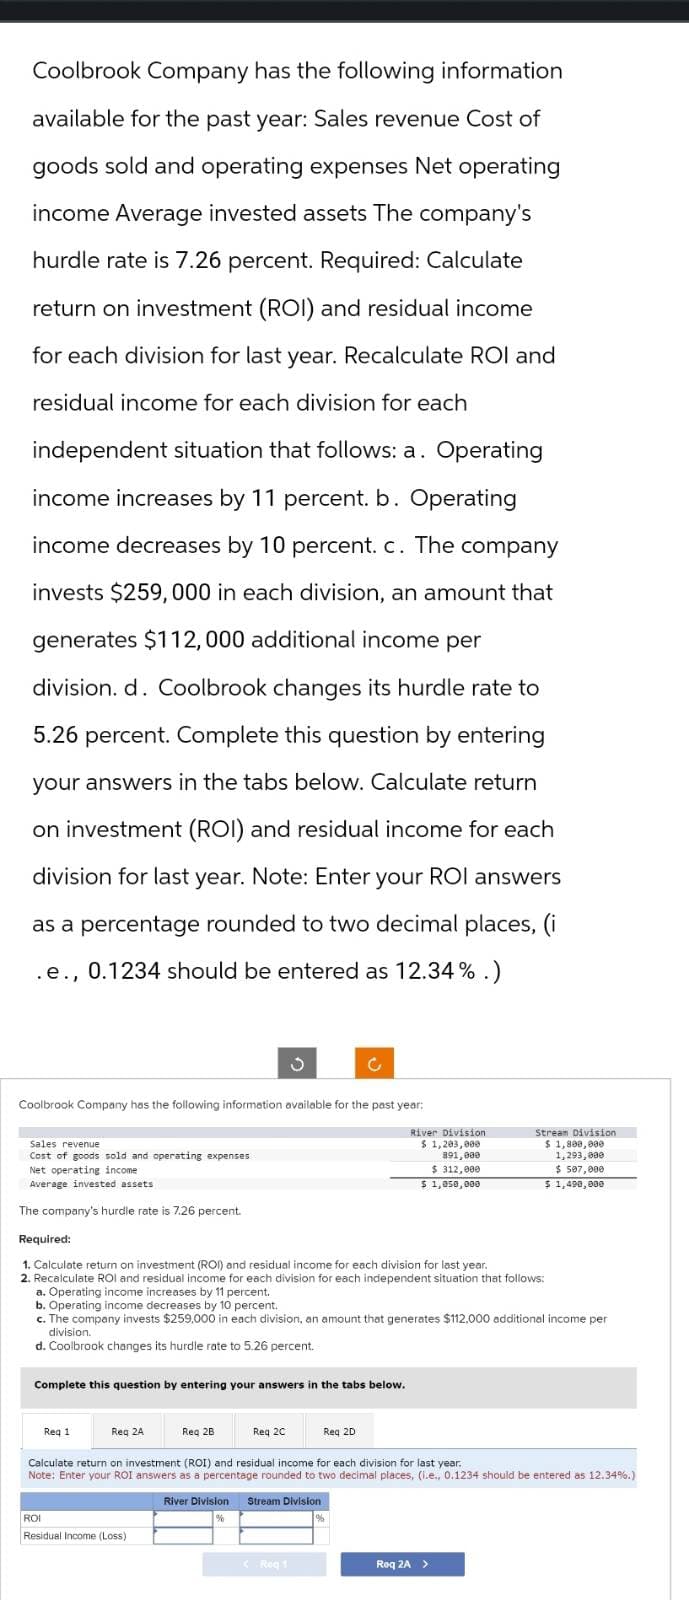 Coolbrook Company has the following information
available for the past year: Sales revenue Cost of
goods sold and operating expenses Net operating
income Average invested assets The company's
hurdle rate is 7.26 percent. Required: Calculate
return on investment (ROI) and residual income
for each division for last year. Recalculate ROI and
residual income for each division for each
independent situation that follows: a. Operating
income increases by 11 percent. b. Operating
income decreases by 10 percent. c. The company
invests $259,000 in each division, an amount that
generates $112,000 additional income per
division. d. Coolbrook changes its hurdle rate to
5.26 percent. Complete this question by entering
your answers in the tabs below. Calculate return
on investment (ROI) and residual income for each
division for last year. Note: Enter your ROI answers
as a percentage rounded to two decimal places, (i
.e., 0.1234 should be entered as 12.34% .)
Sales revenue
Cost of goods sold and operating expenses
Net operating income
Average invested assets
Coolbrook Company has the following information available for the past year:
The company's hurdle rate is 7.26 percent.
Req 1
Complete this question by entering your answers in the tabs below.
Reg 2A
Required:
1. Calculate return on investment (ROI) and residual income for each division for last year.
2. Recalculate ROI and residual income for each division for each independent situation that follows:
Operating income increases by 11 percent.
b. Operating income decreases by 10 percent.
c. The company invests $259,000 in each division, an amount that generates $112.000 additional income per
division.
d. Coolbrook changes its hurdle rate to 5.26 percent.
3
Req 2B
ROI
Residual Income (Loss)
Req 2C
C
River Division Stream Division
%
<Rog 1
Req 2D
River Division
$ 1,203,000
891,000
$ 312,000
$ 1,050,000
Calculate return on investment (ROI) and residual income for each division for last year.
Note: Enter your ROI answers as a percentage rounded to two decimal places, (i.e., 0.1234 should be entered as 12.34%.)
Stream Division
$ 1,800,000
1,293,000
$ 507,000
$ 1,490,000
Roq 2A >